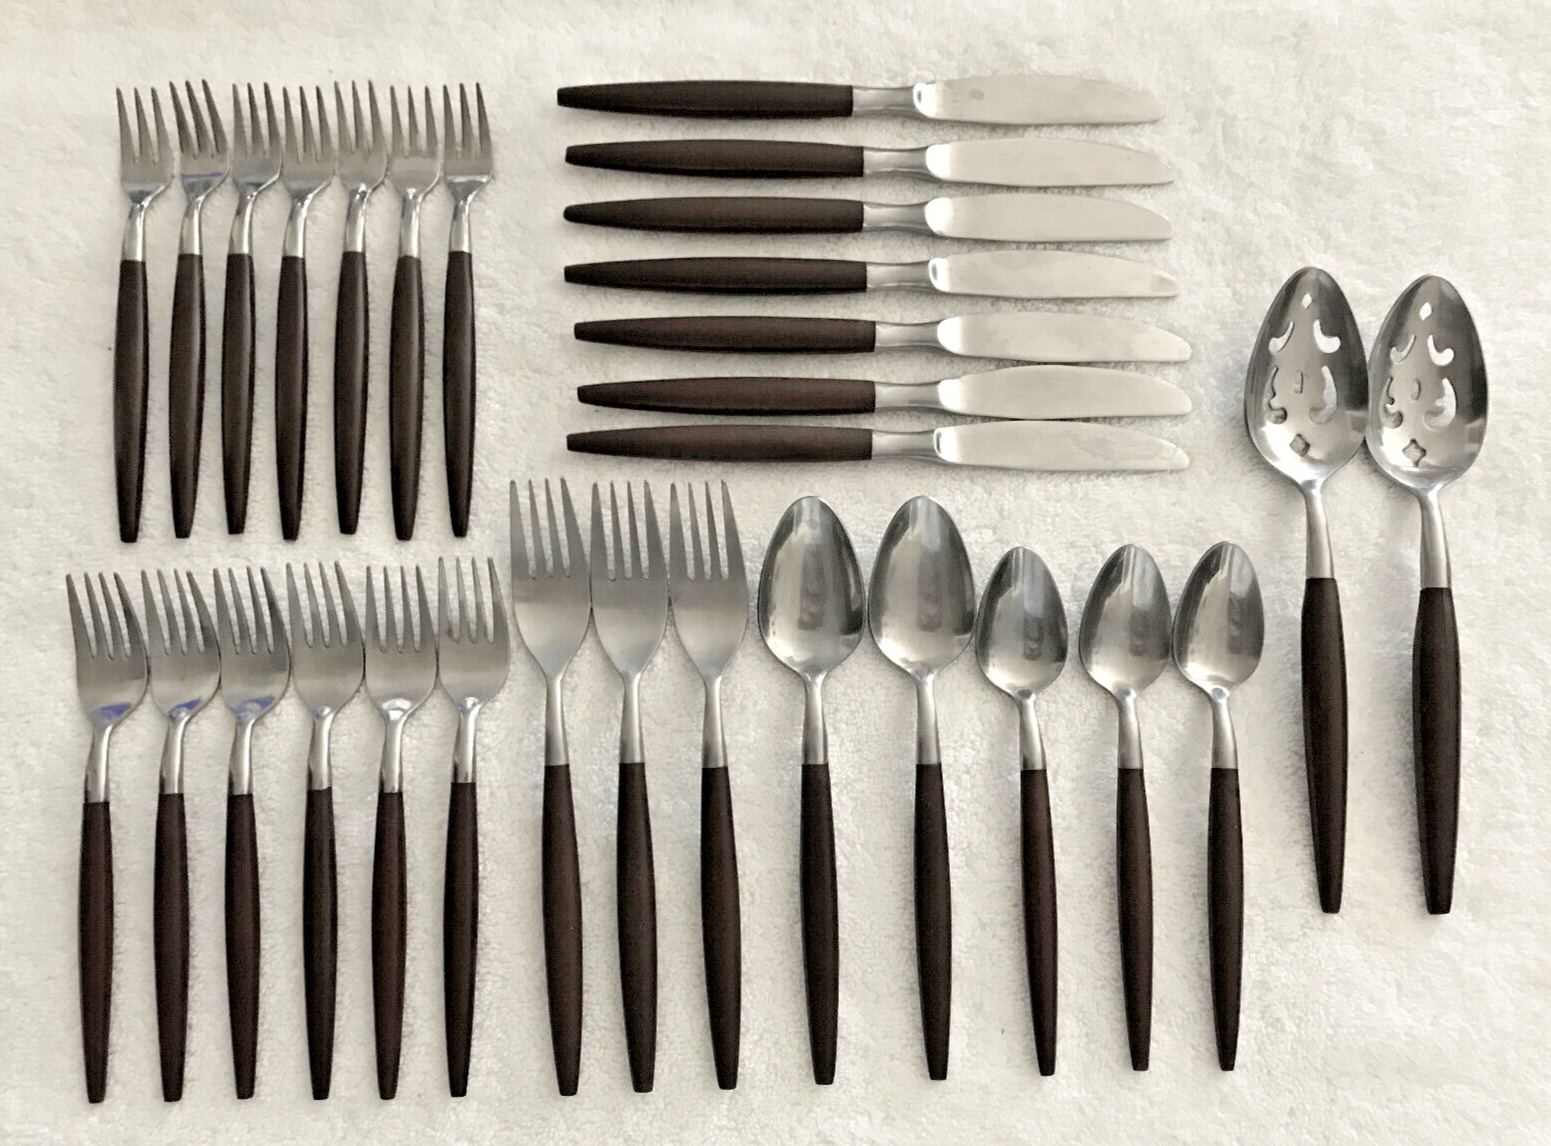 American Tempo Stainless Flatware Japan Faux Wood Handles 30 Pcs